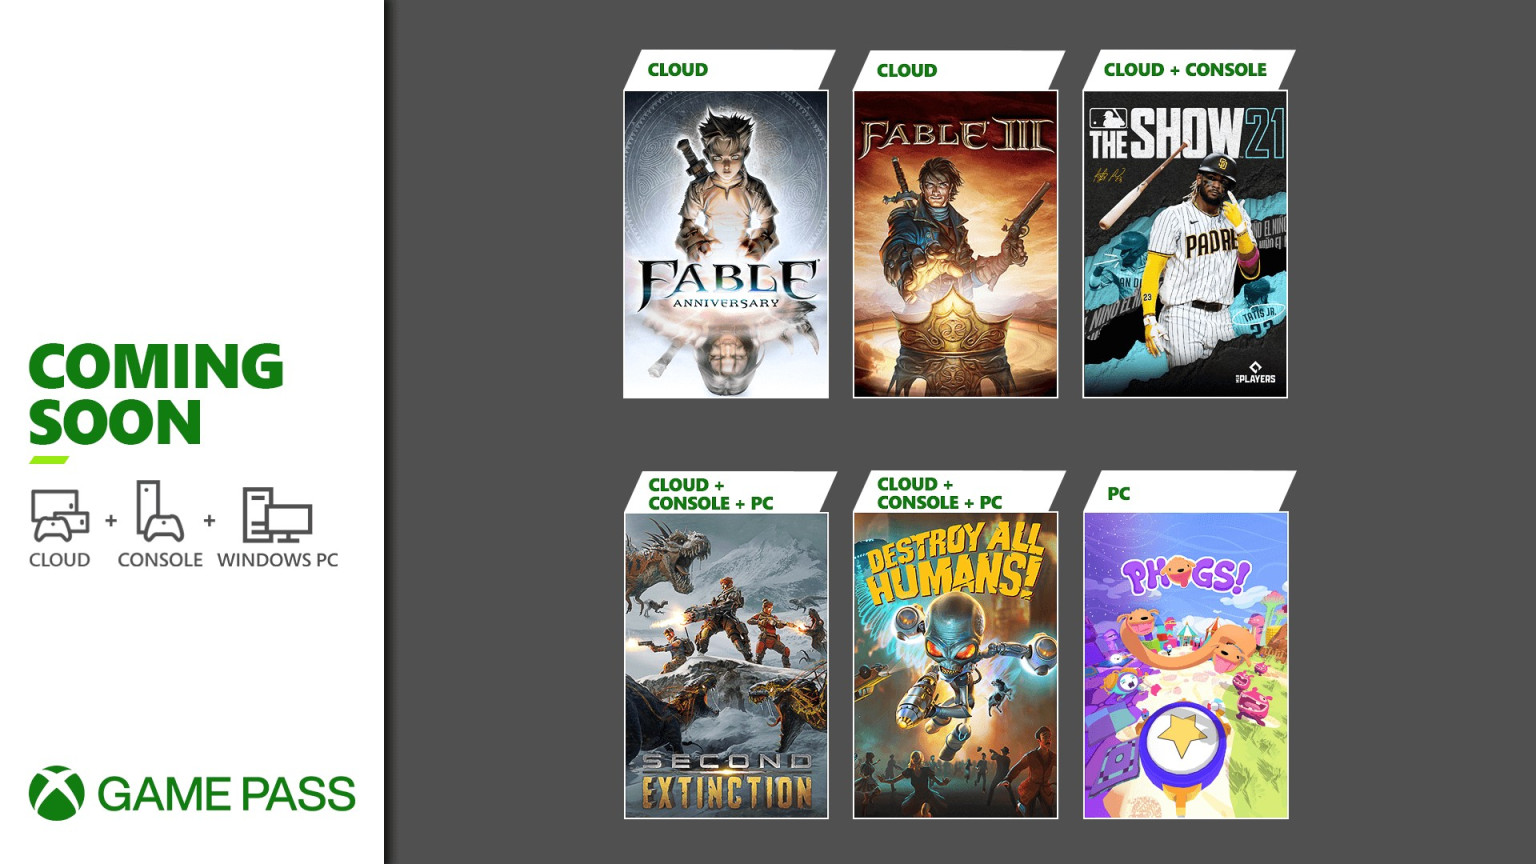 xbox games pass for mac